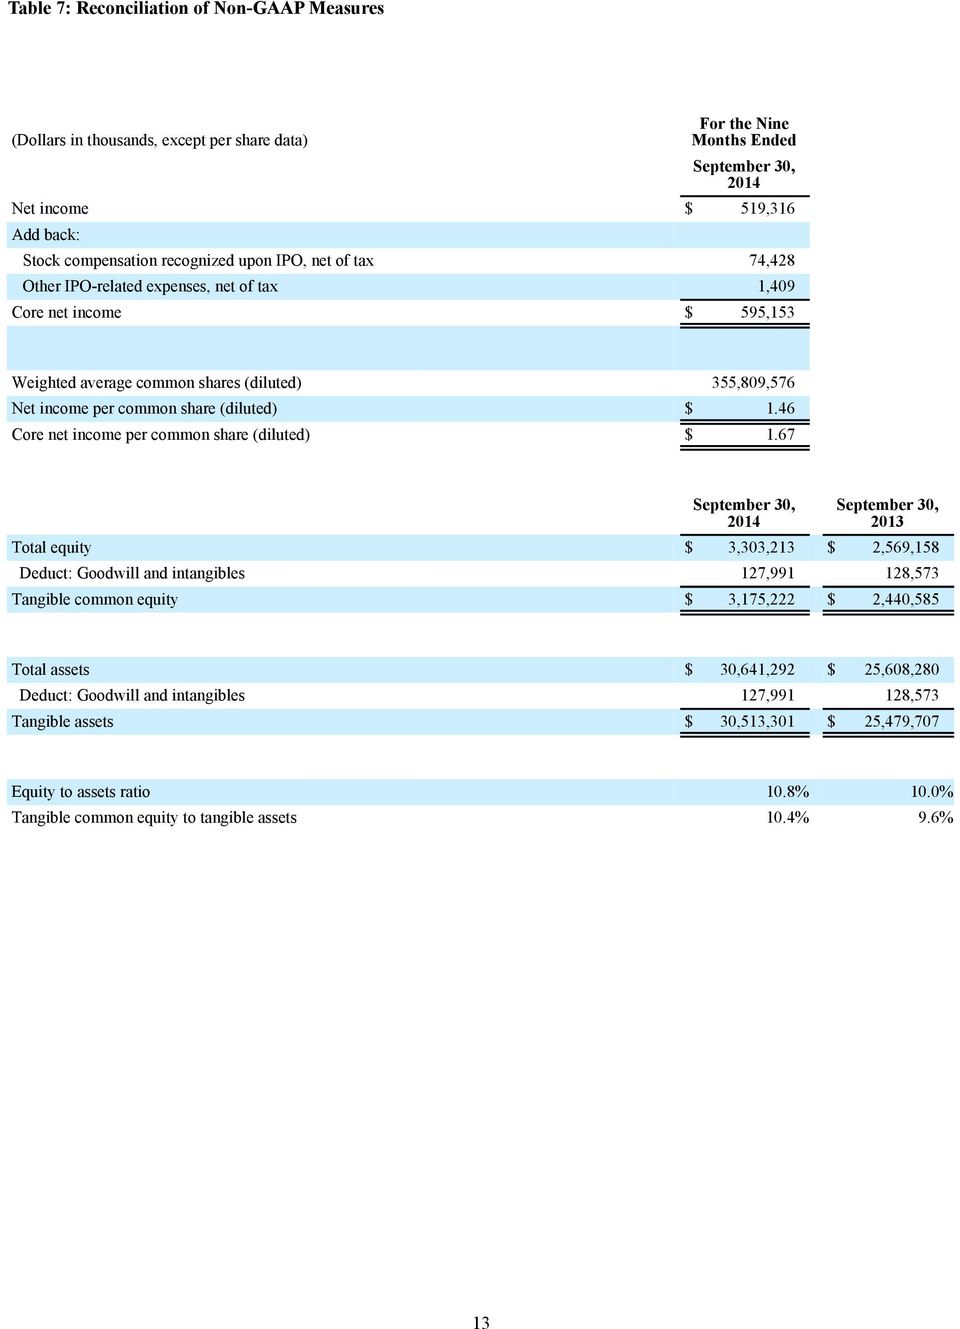 46 Core net income per common share (diluted) $ 1.